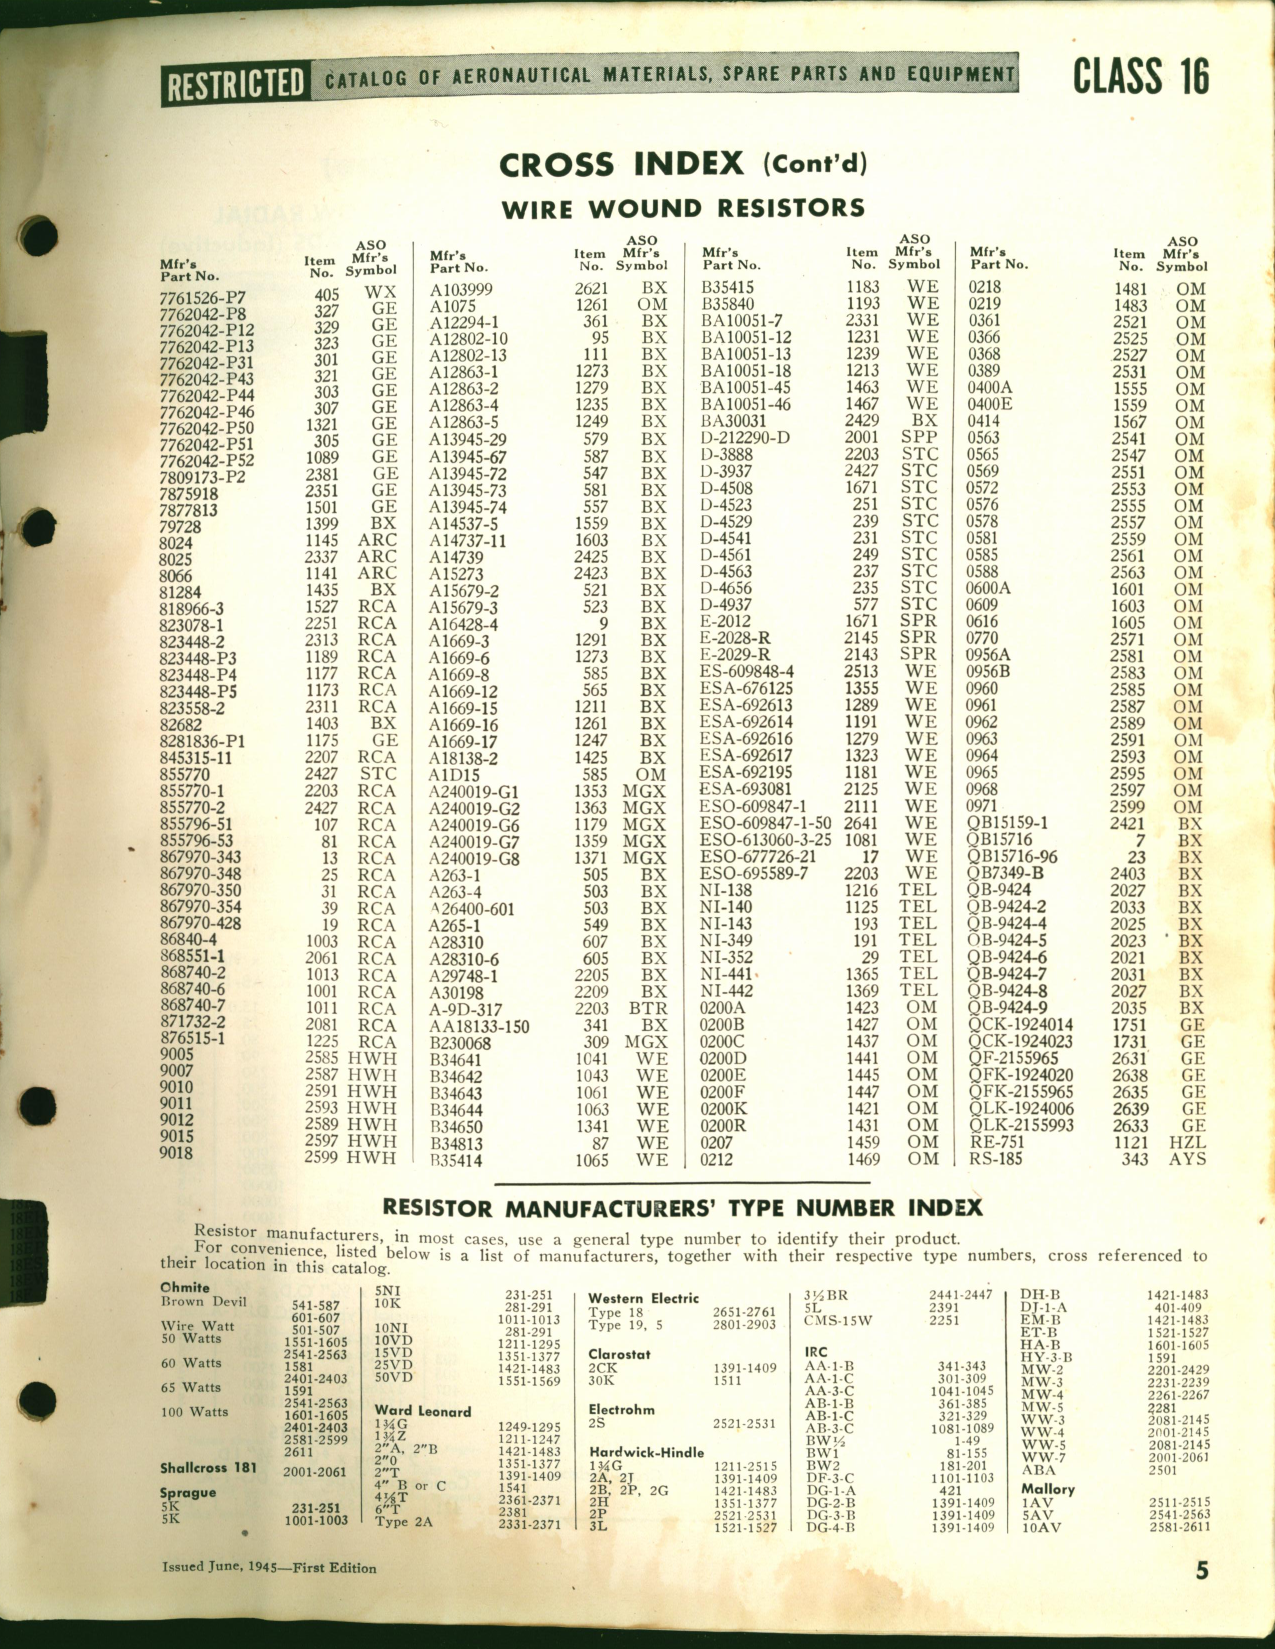 Sample page 5 from AirCorps Library document: Wire Wound Resistors